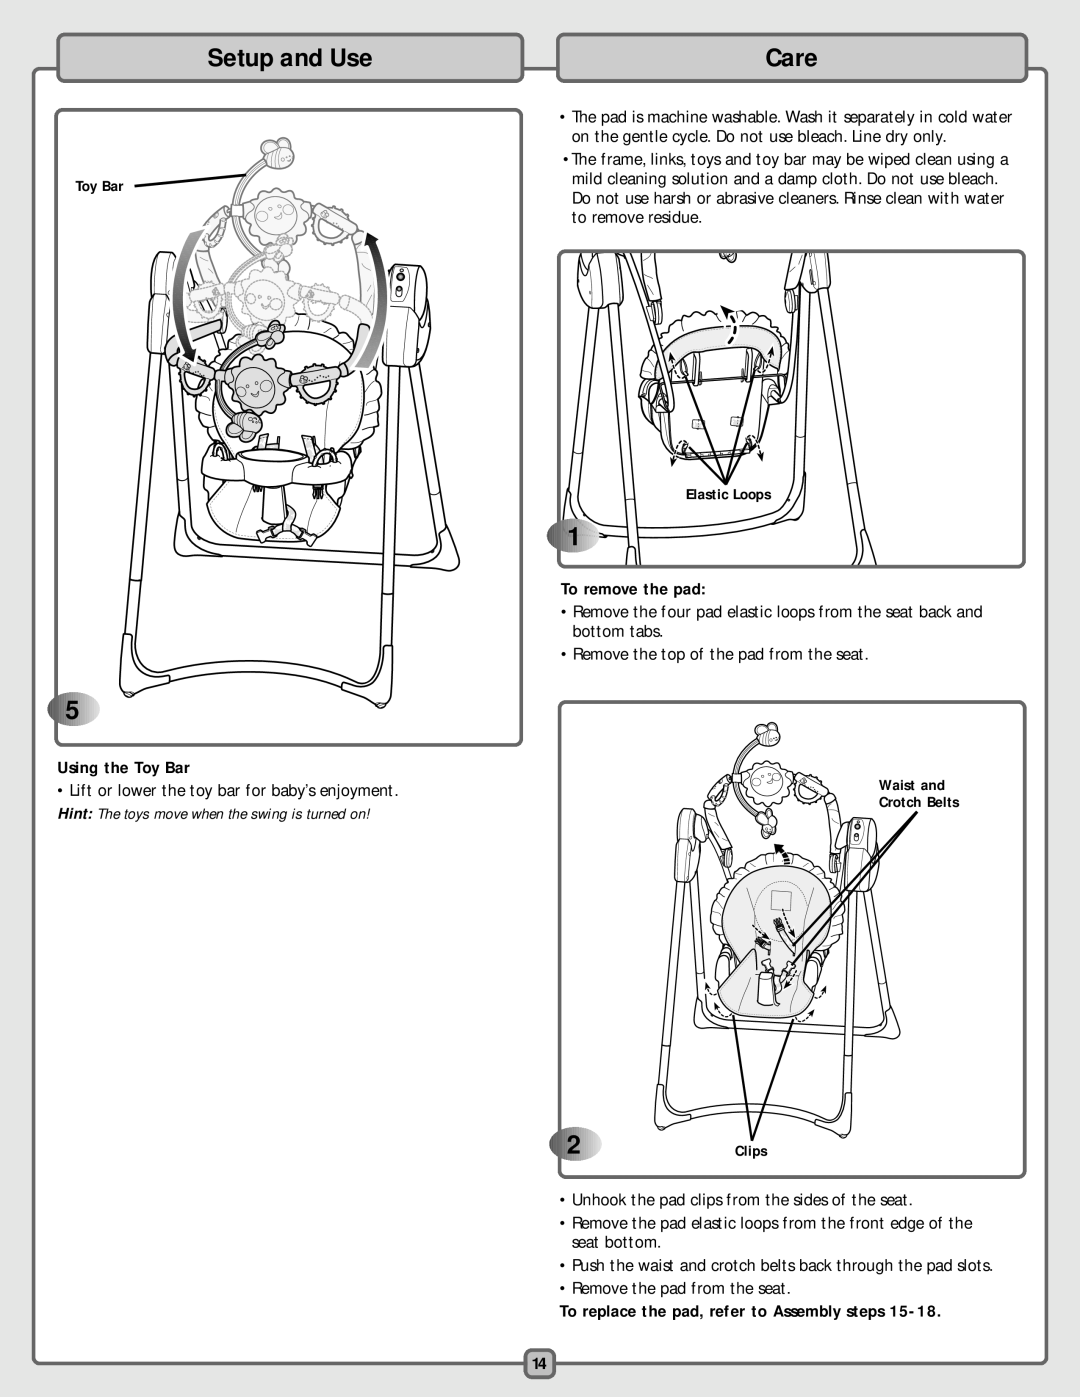 Fisher-Price H4792 manual Care, Setup and Use, Using the Toy Bar, Hint The toys move when the swing is turned on 